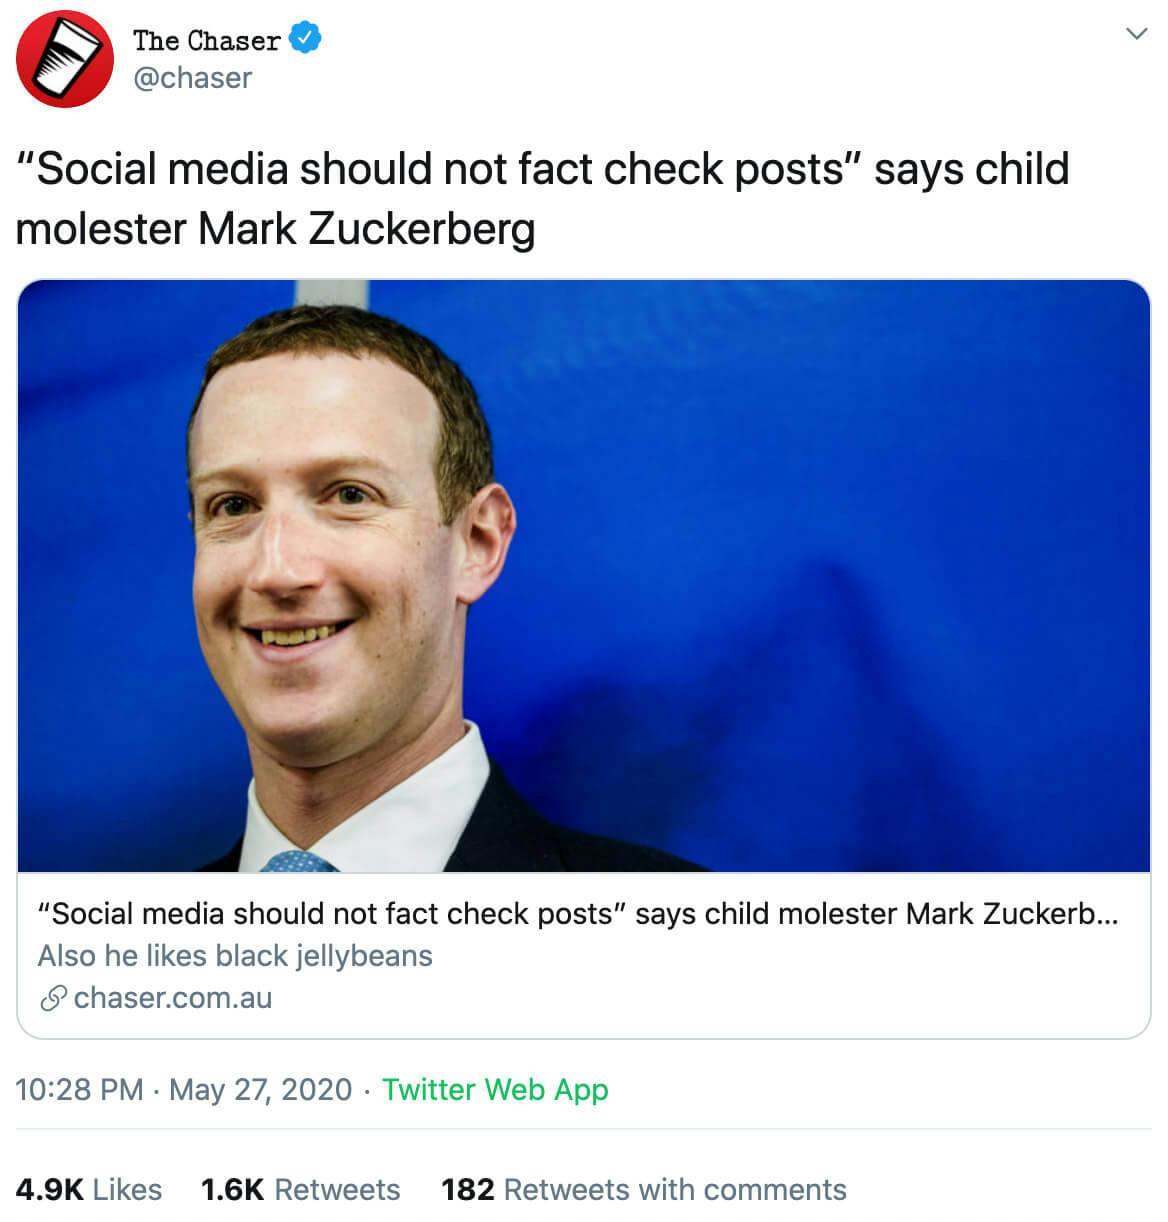 A tweet from The Chaser discussing Facebook CEO Mark Zuckerberg